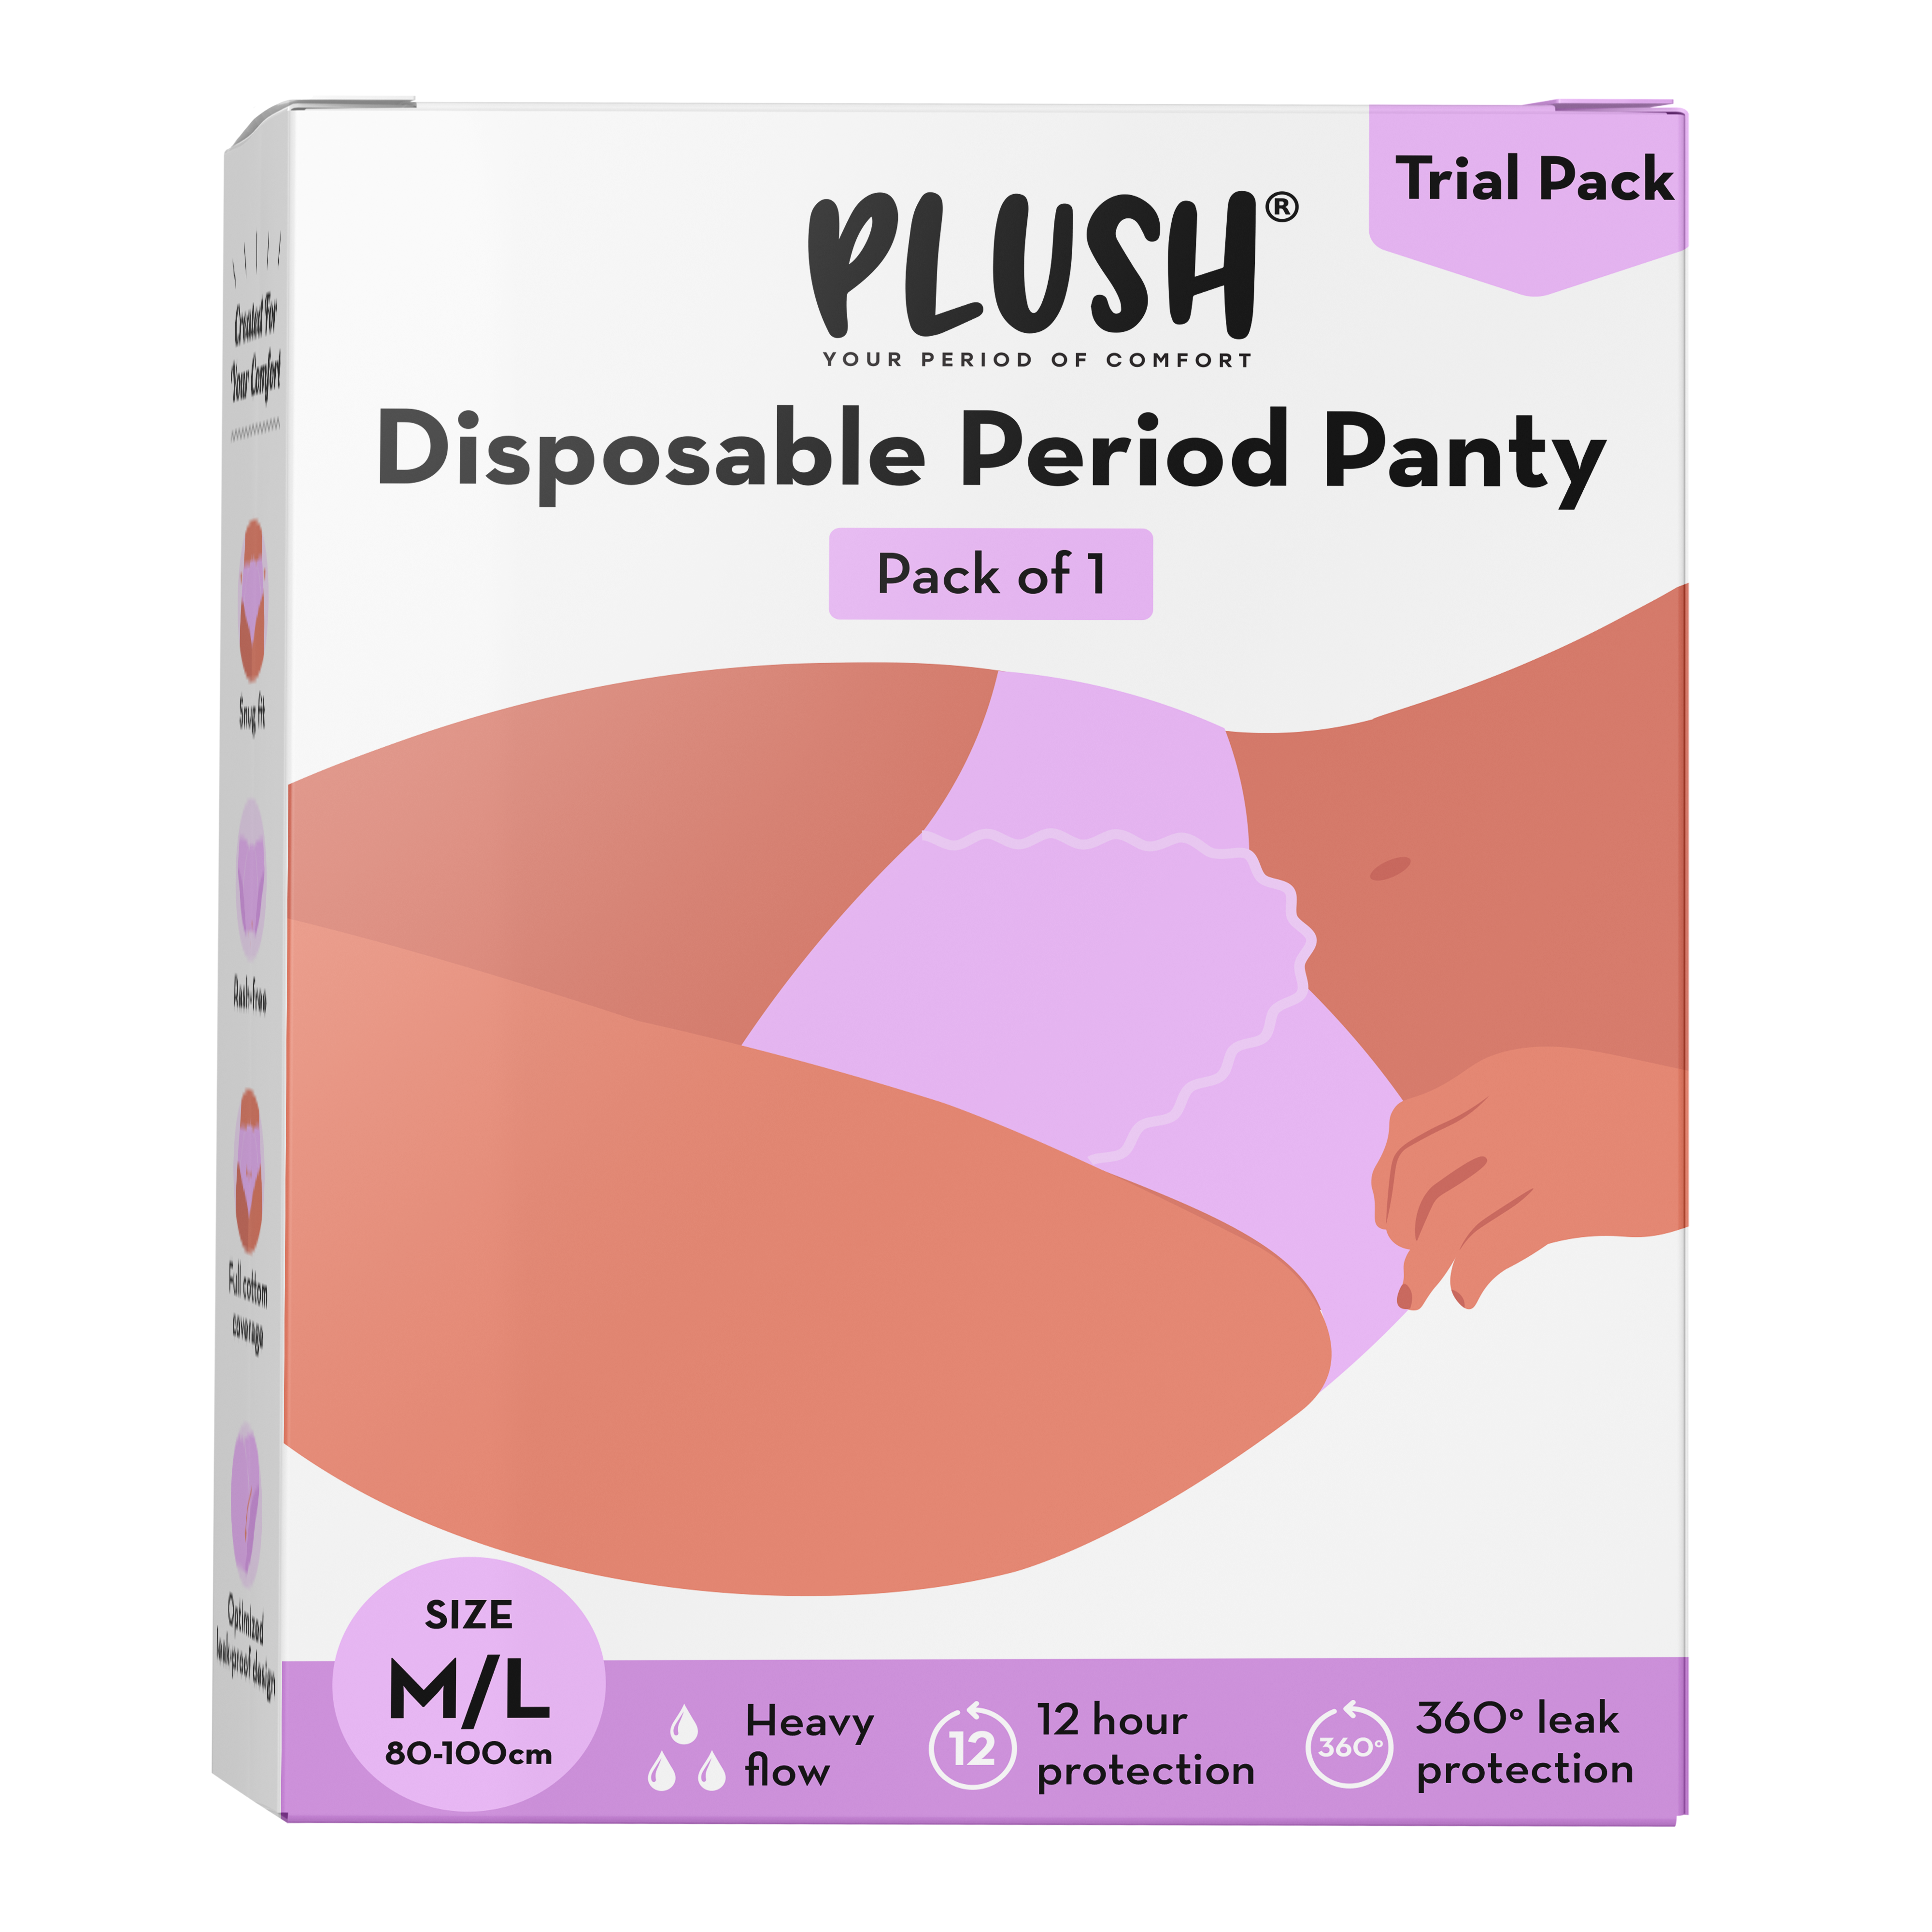 Disposable Period Panty- Pack of 1